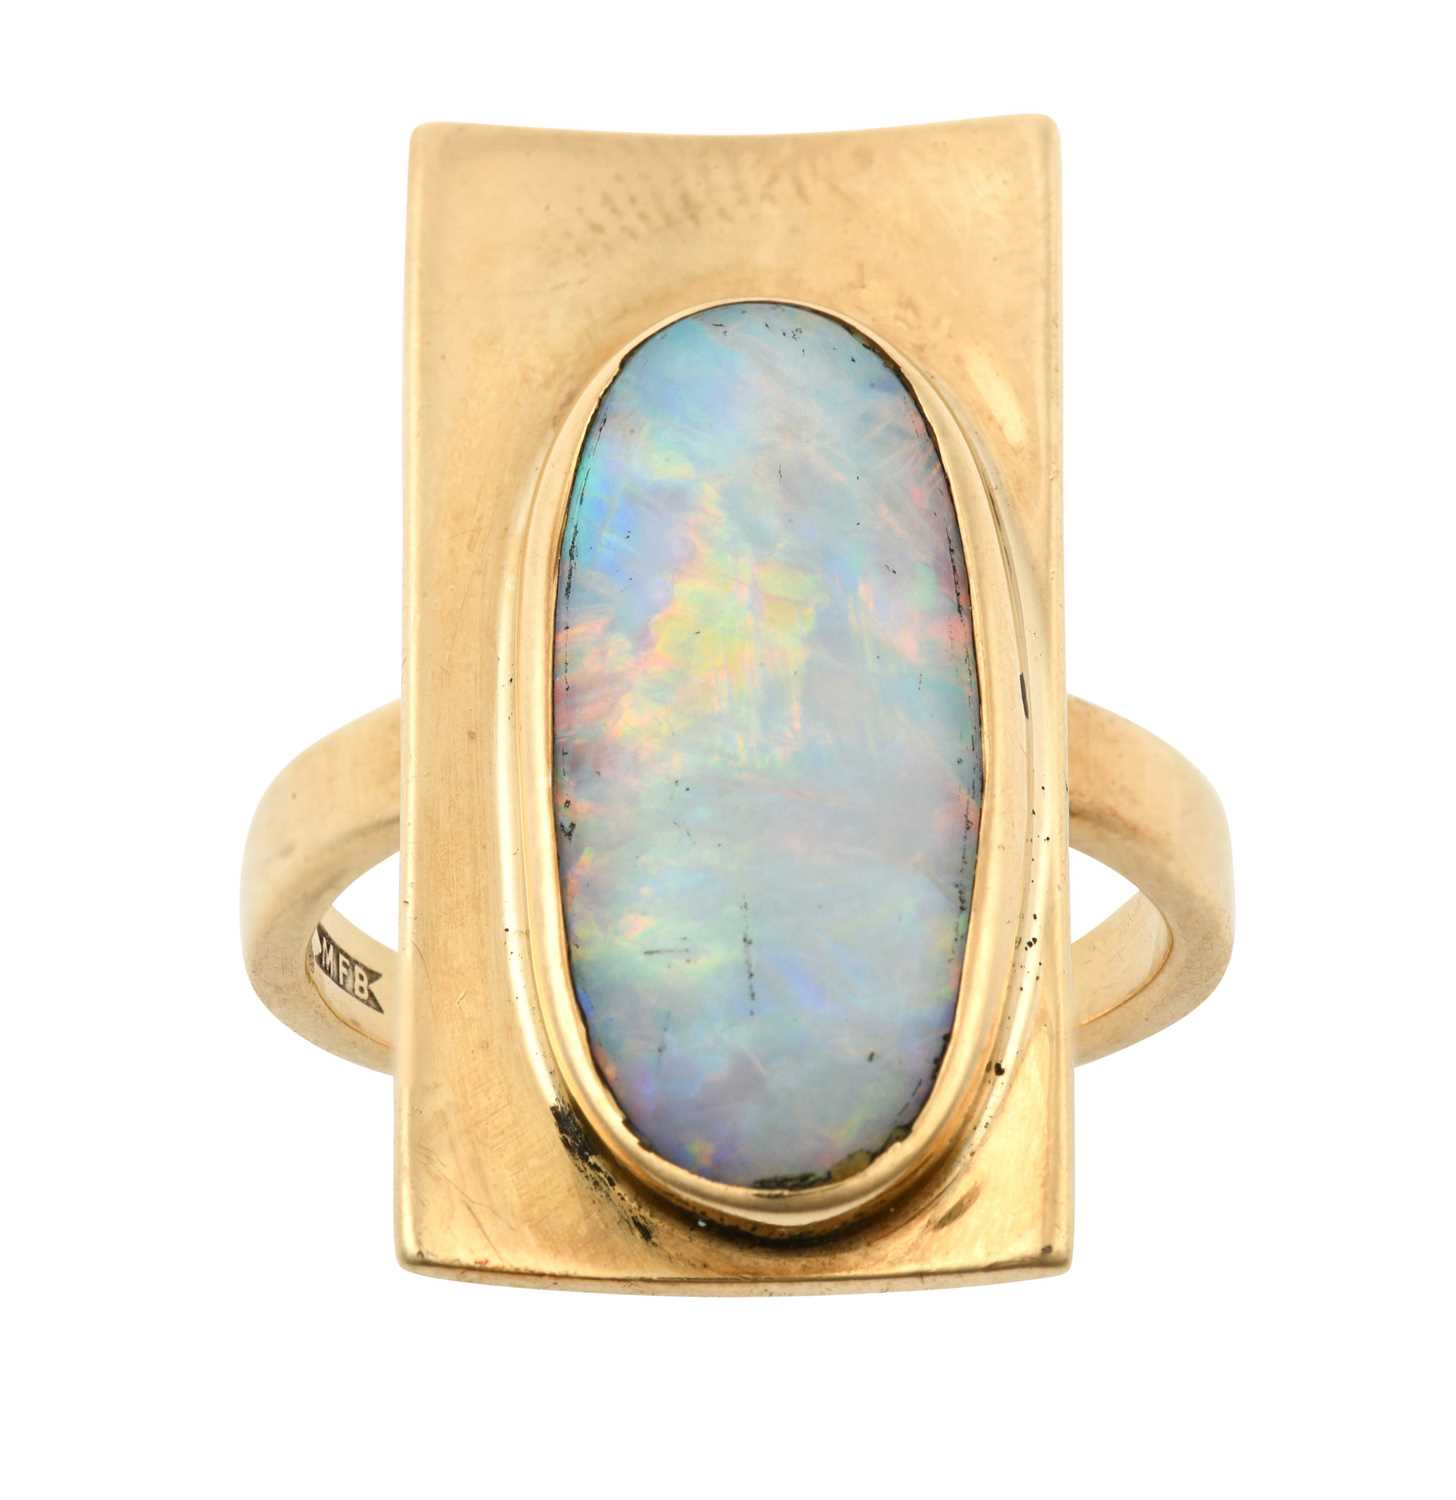 An Opal Ring the yellow plain polished rectangular plaque overlaid with an oval opal plaque, in a